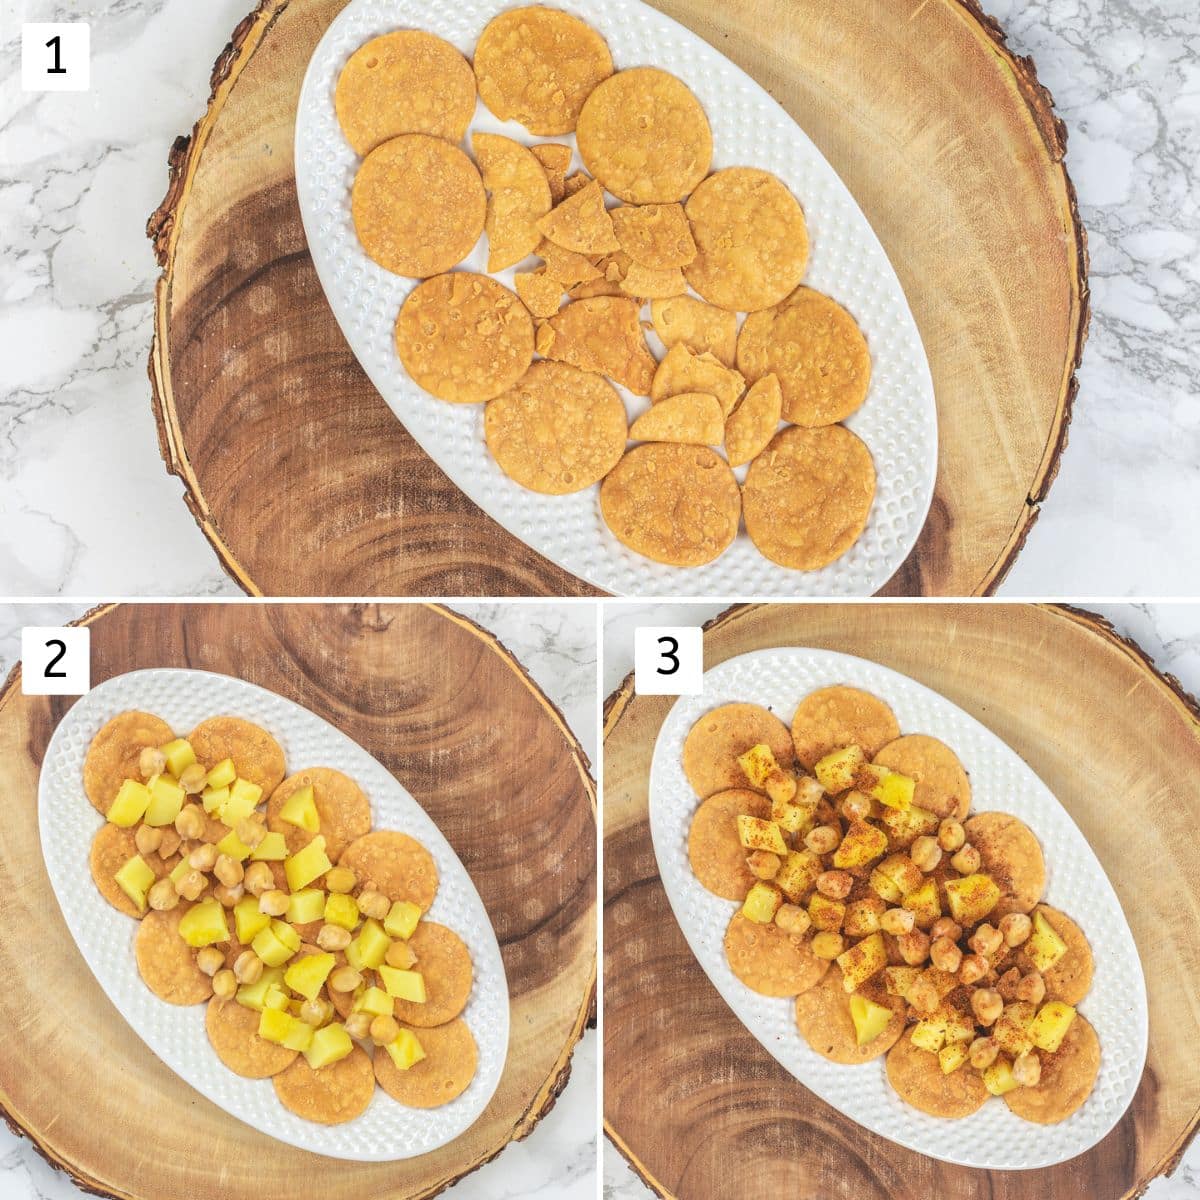 Collage of 3 images showing arranged papdi in a plate, adding chickpeas, potatoes and sprinkling spice mixture.